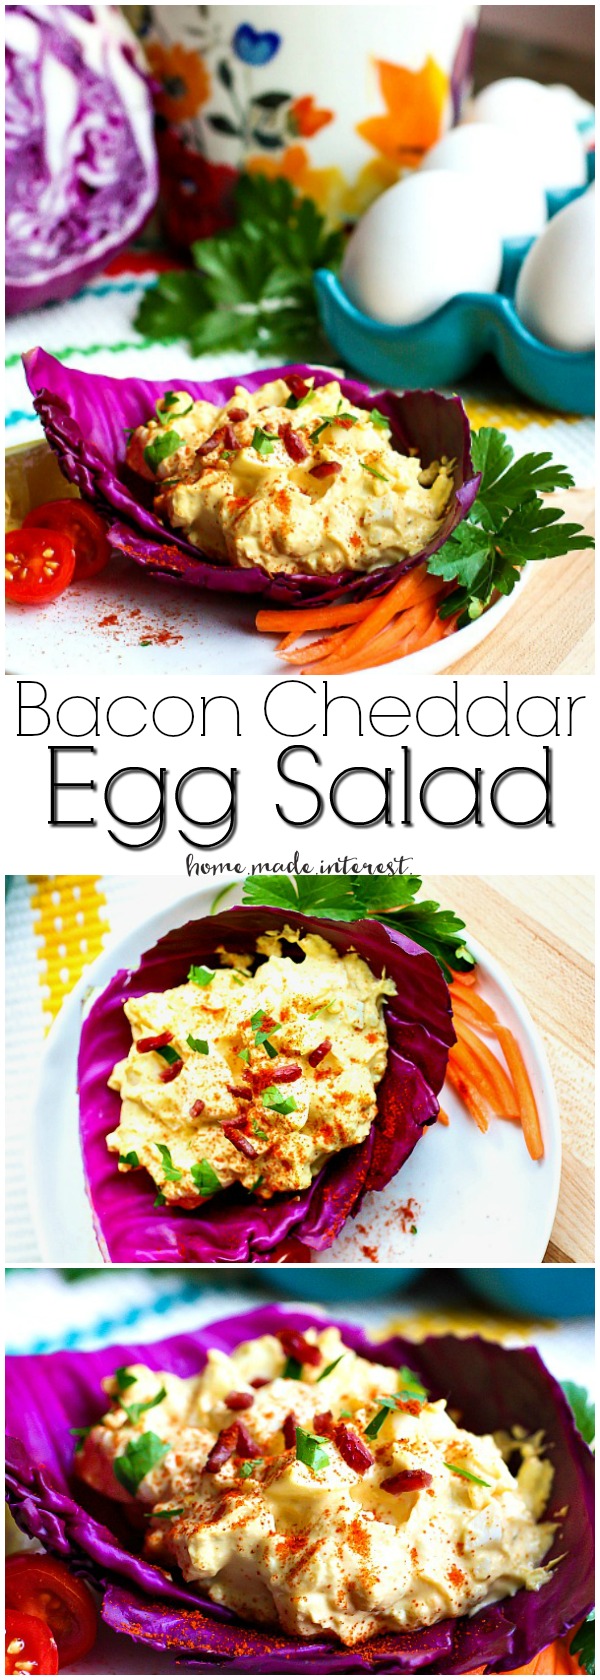 Bacon Cheddar Egg Salad | Need something to do with those Easter leftovers? This Bacon Cheddar Egg Salad is a low carb recipe that uses up all of those hard-boiled eggs you have leftover from Easter. Bacon Cheddar Egg Salad combines bacon, eggs, and cheddar cheese to make an easy Easter brunch recipe or a low carb recipe you can take for lunch or make for dinner all year long. 